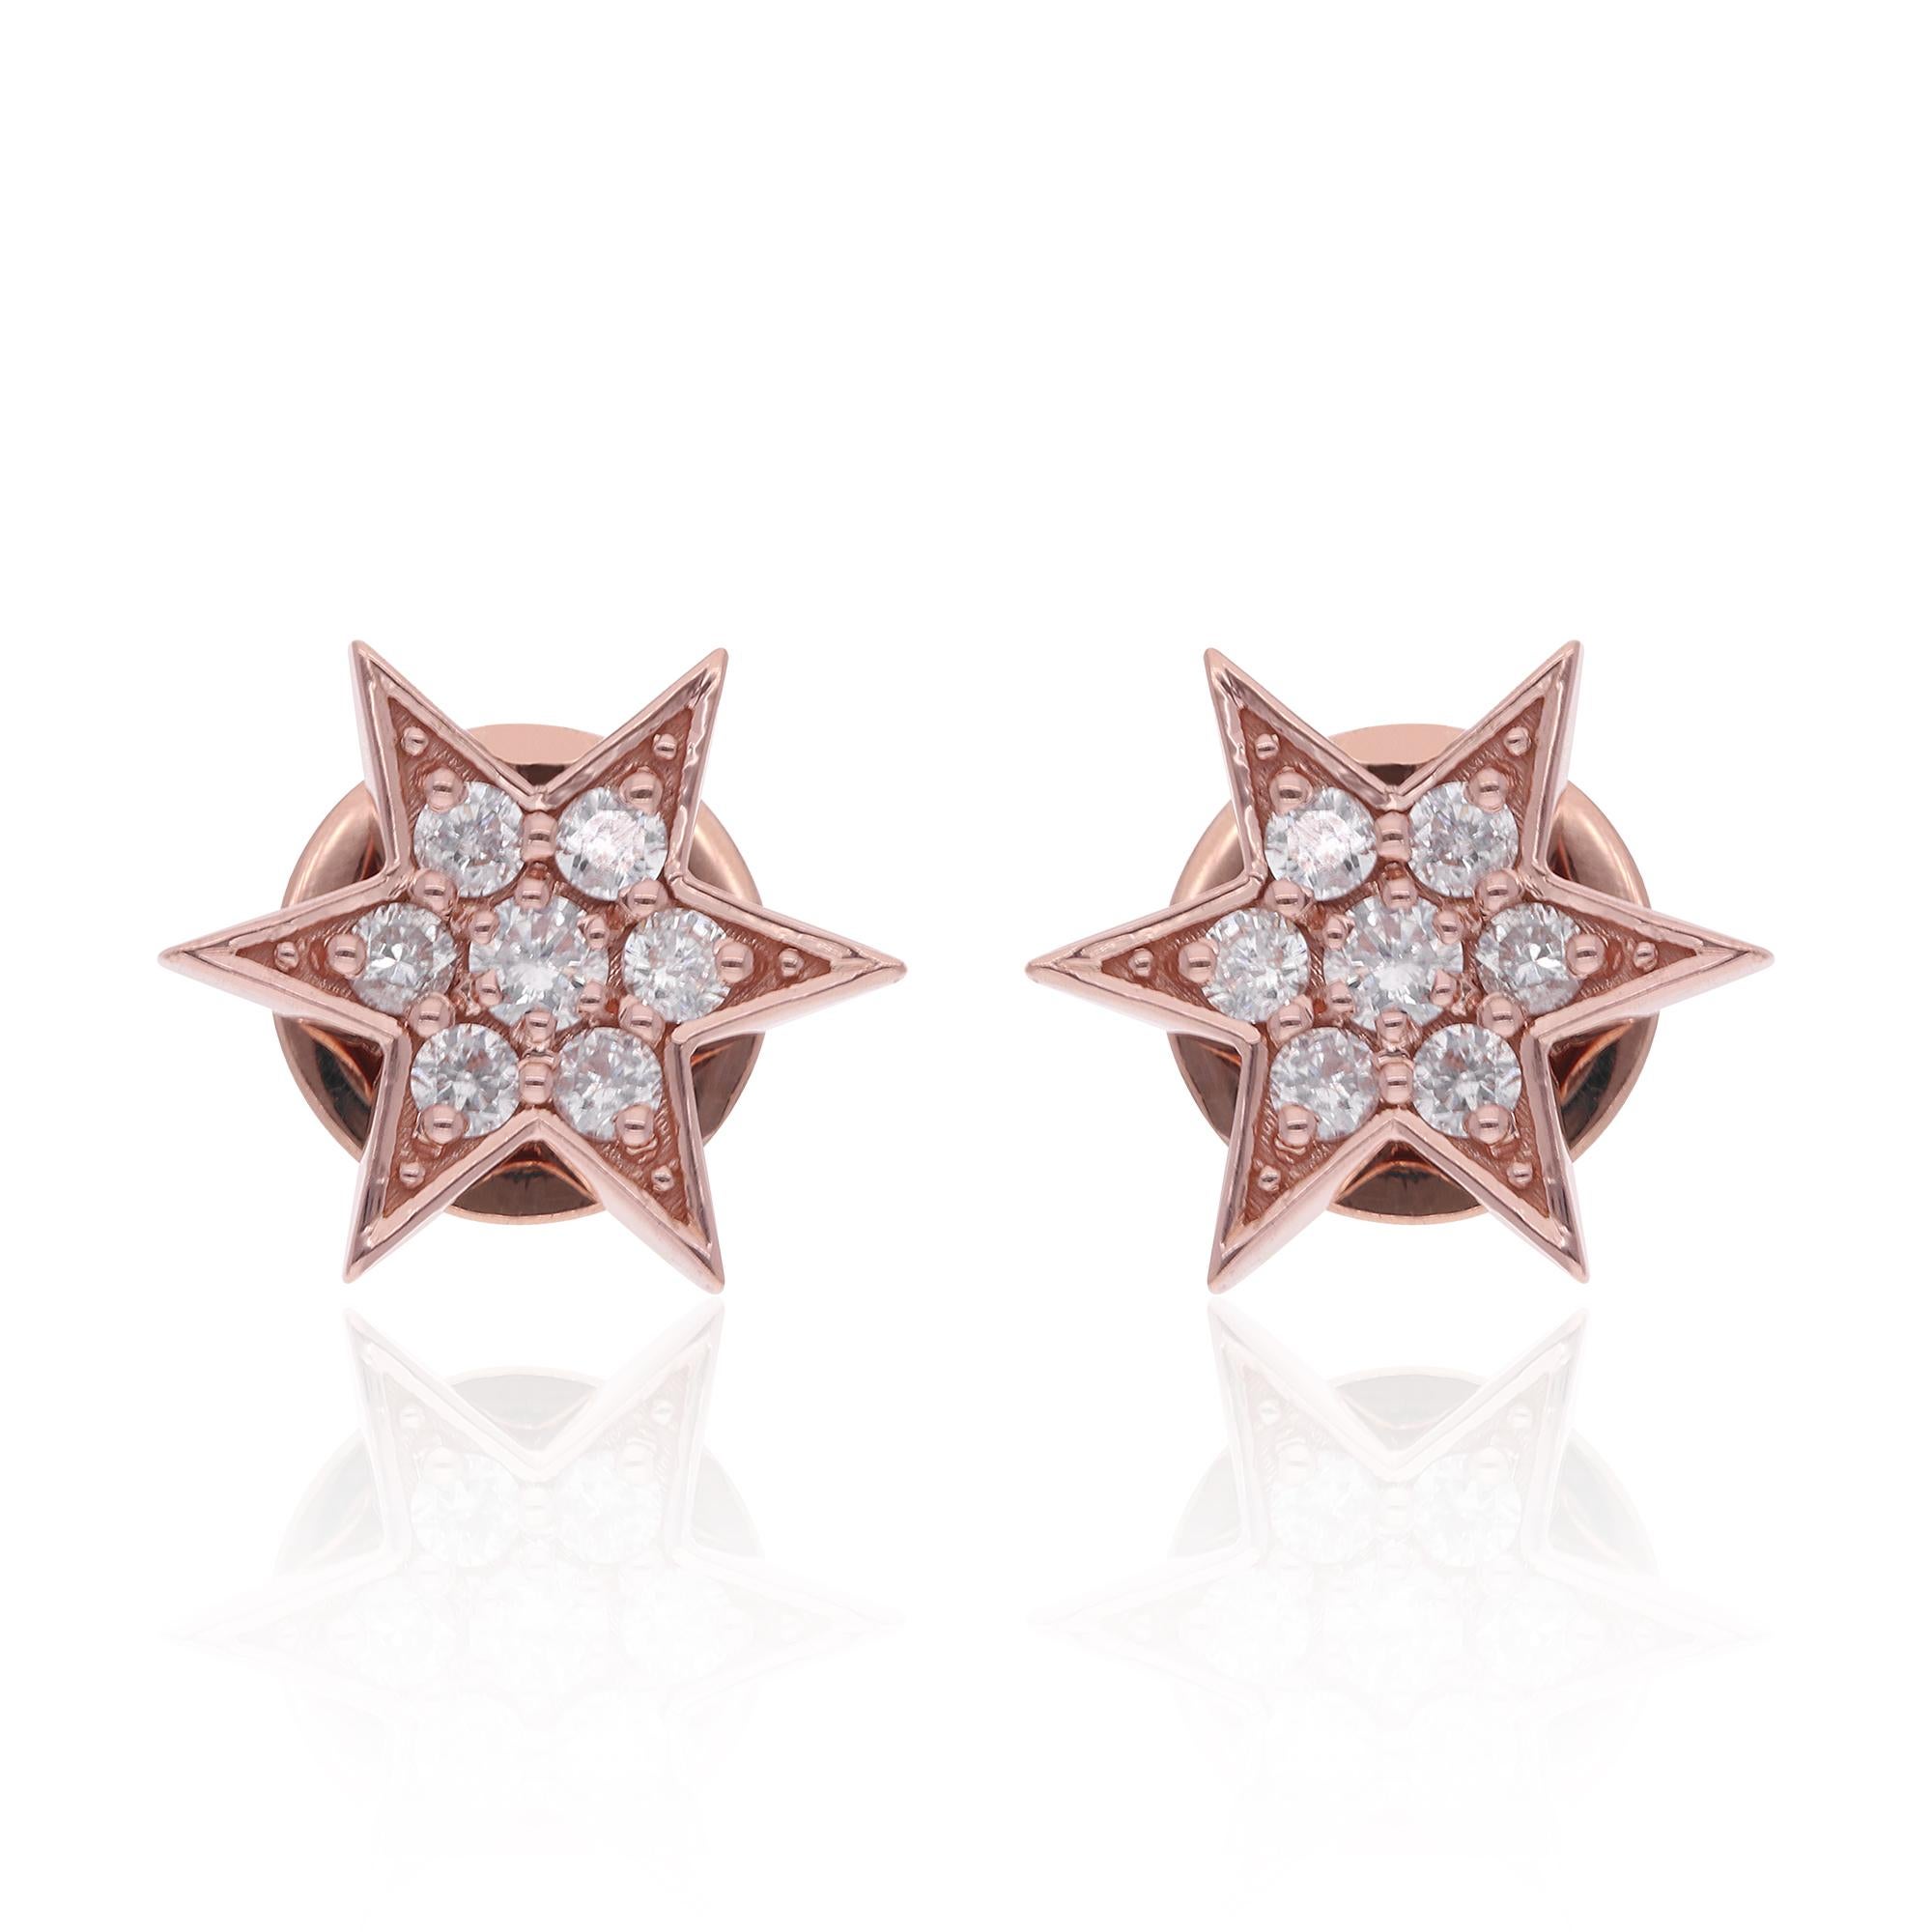 These exquisite stud earrings feature a starburst design that is both captivating and elegant. Each earring showcases a central diamond surrounded by smaller diamonds, forming a radiant starburst pattern.

Item Code :- SEE-14377
Gross Wt. :- 2.69